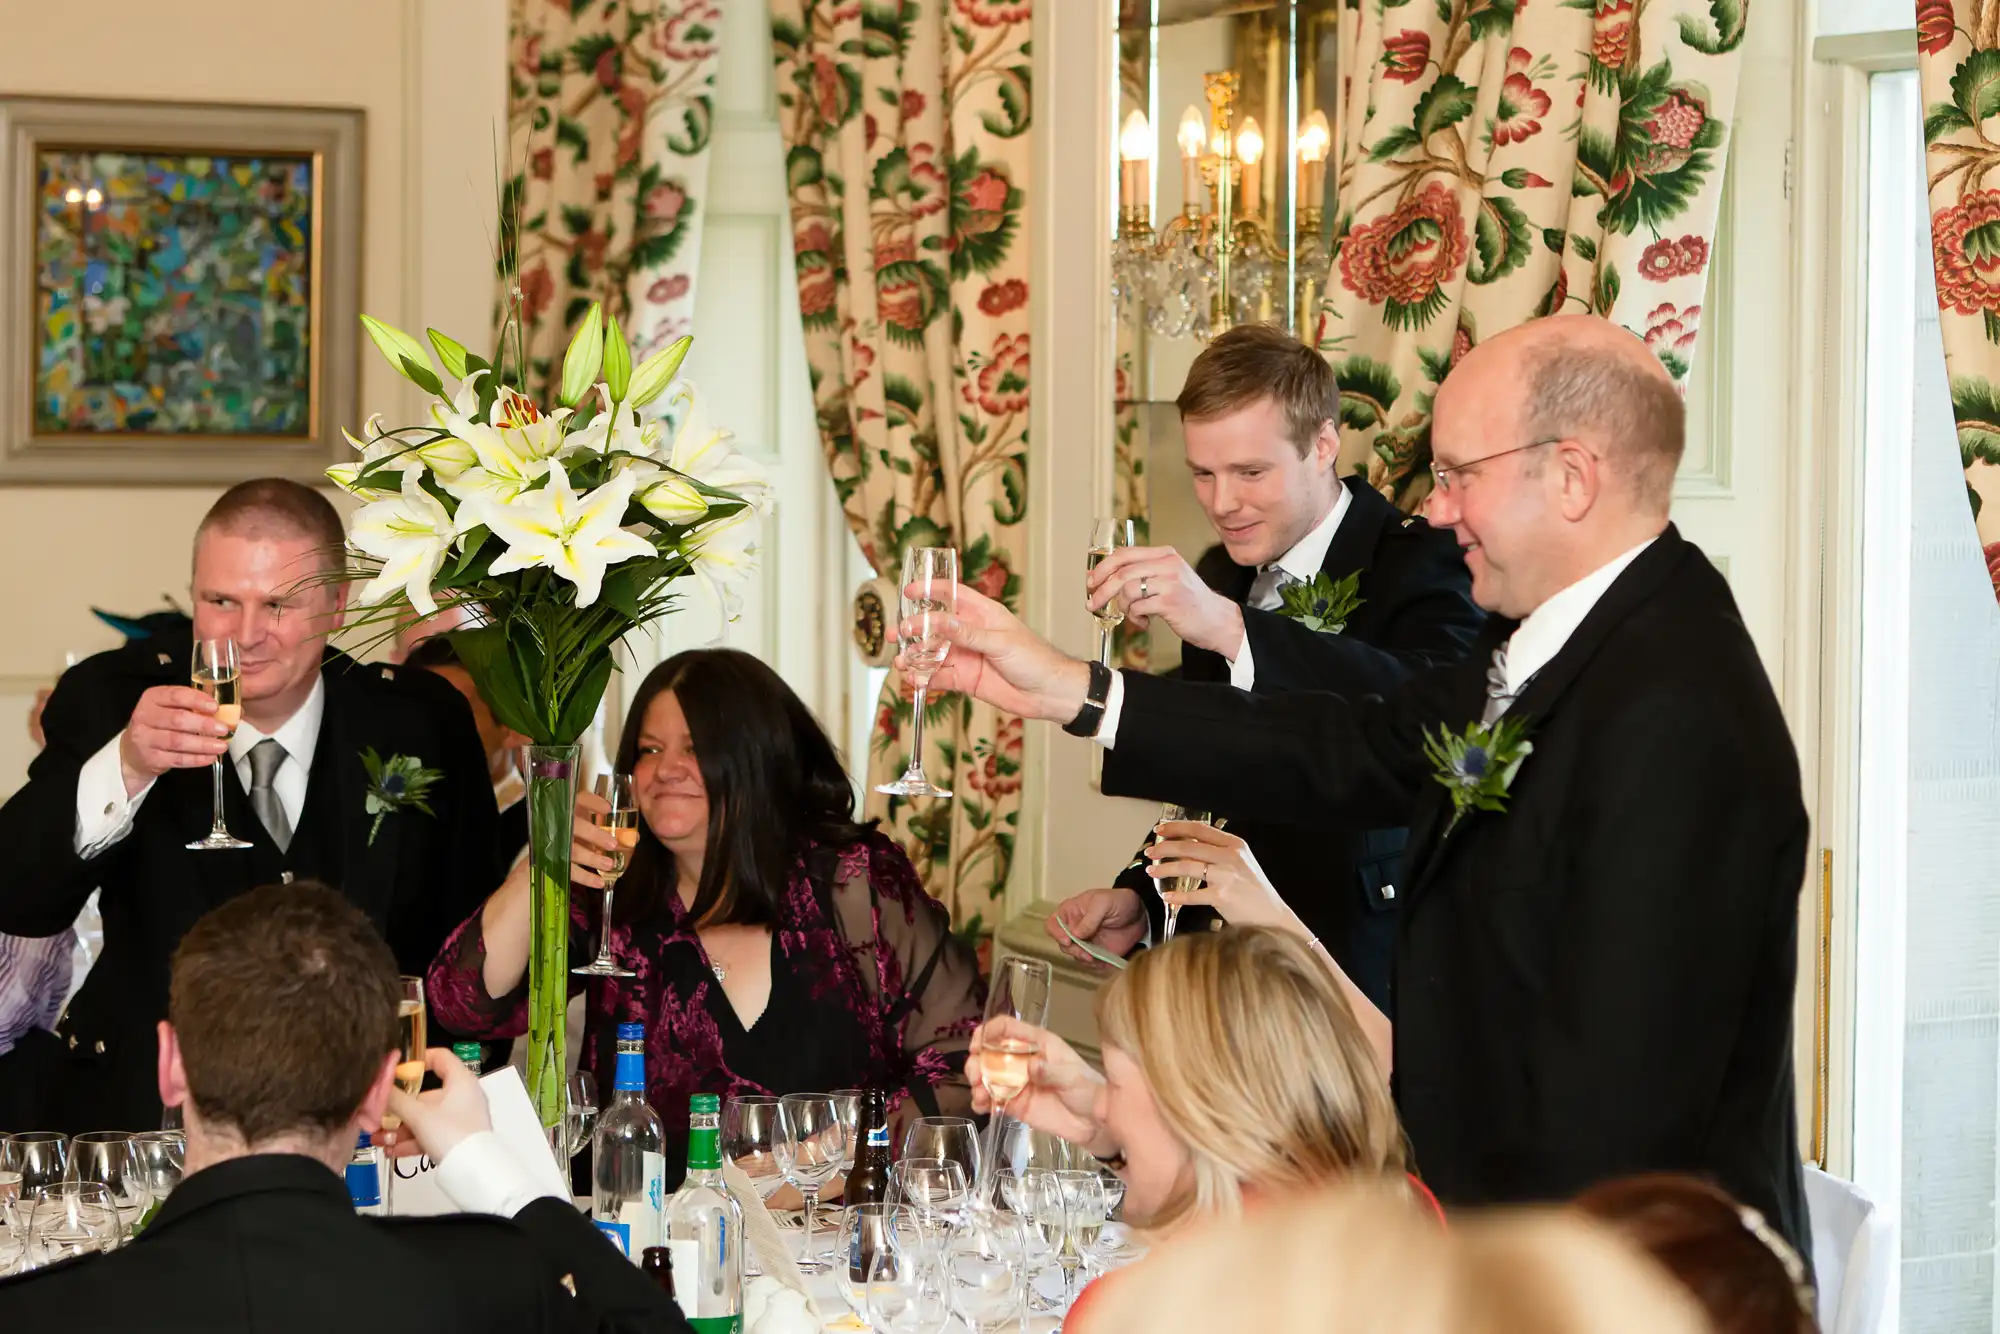 Group of people raising a toast at a formal dining event, with floral decorations and elegant table settings.